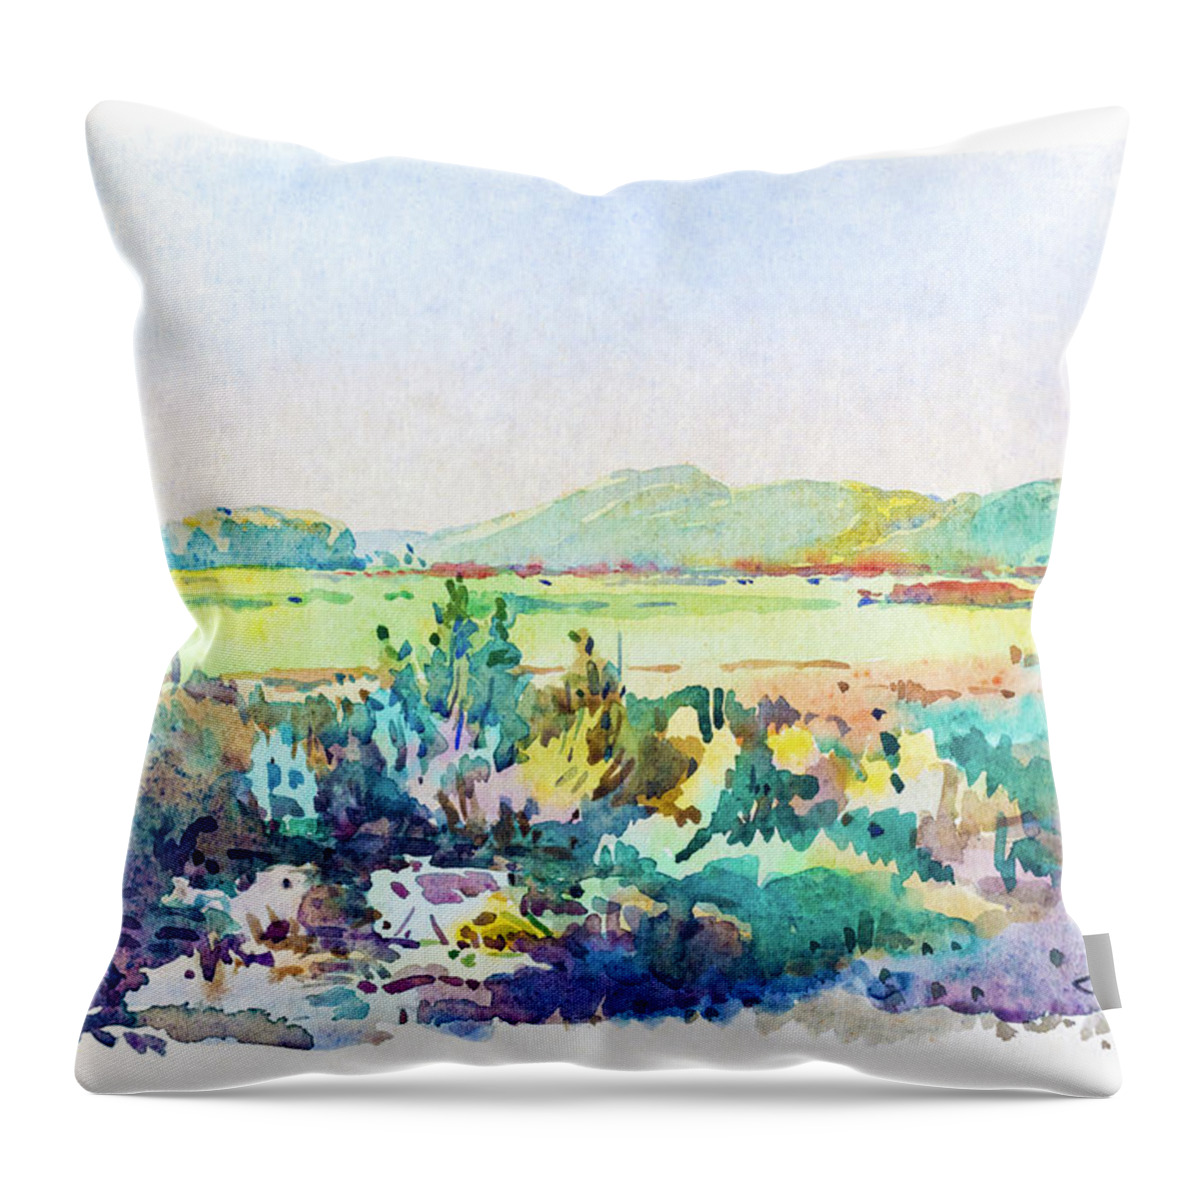 1930s Throw Pillow featuring the painting Landscape, Dalmatia, 1938 by Viktor Wallon-Hars